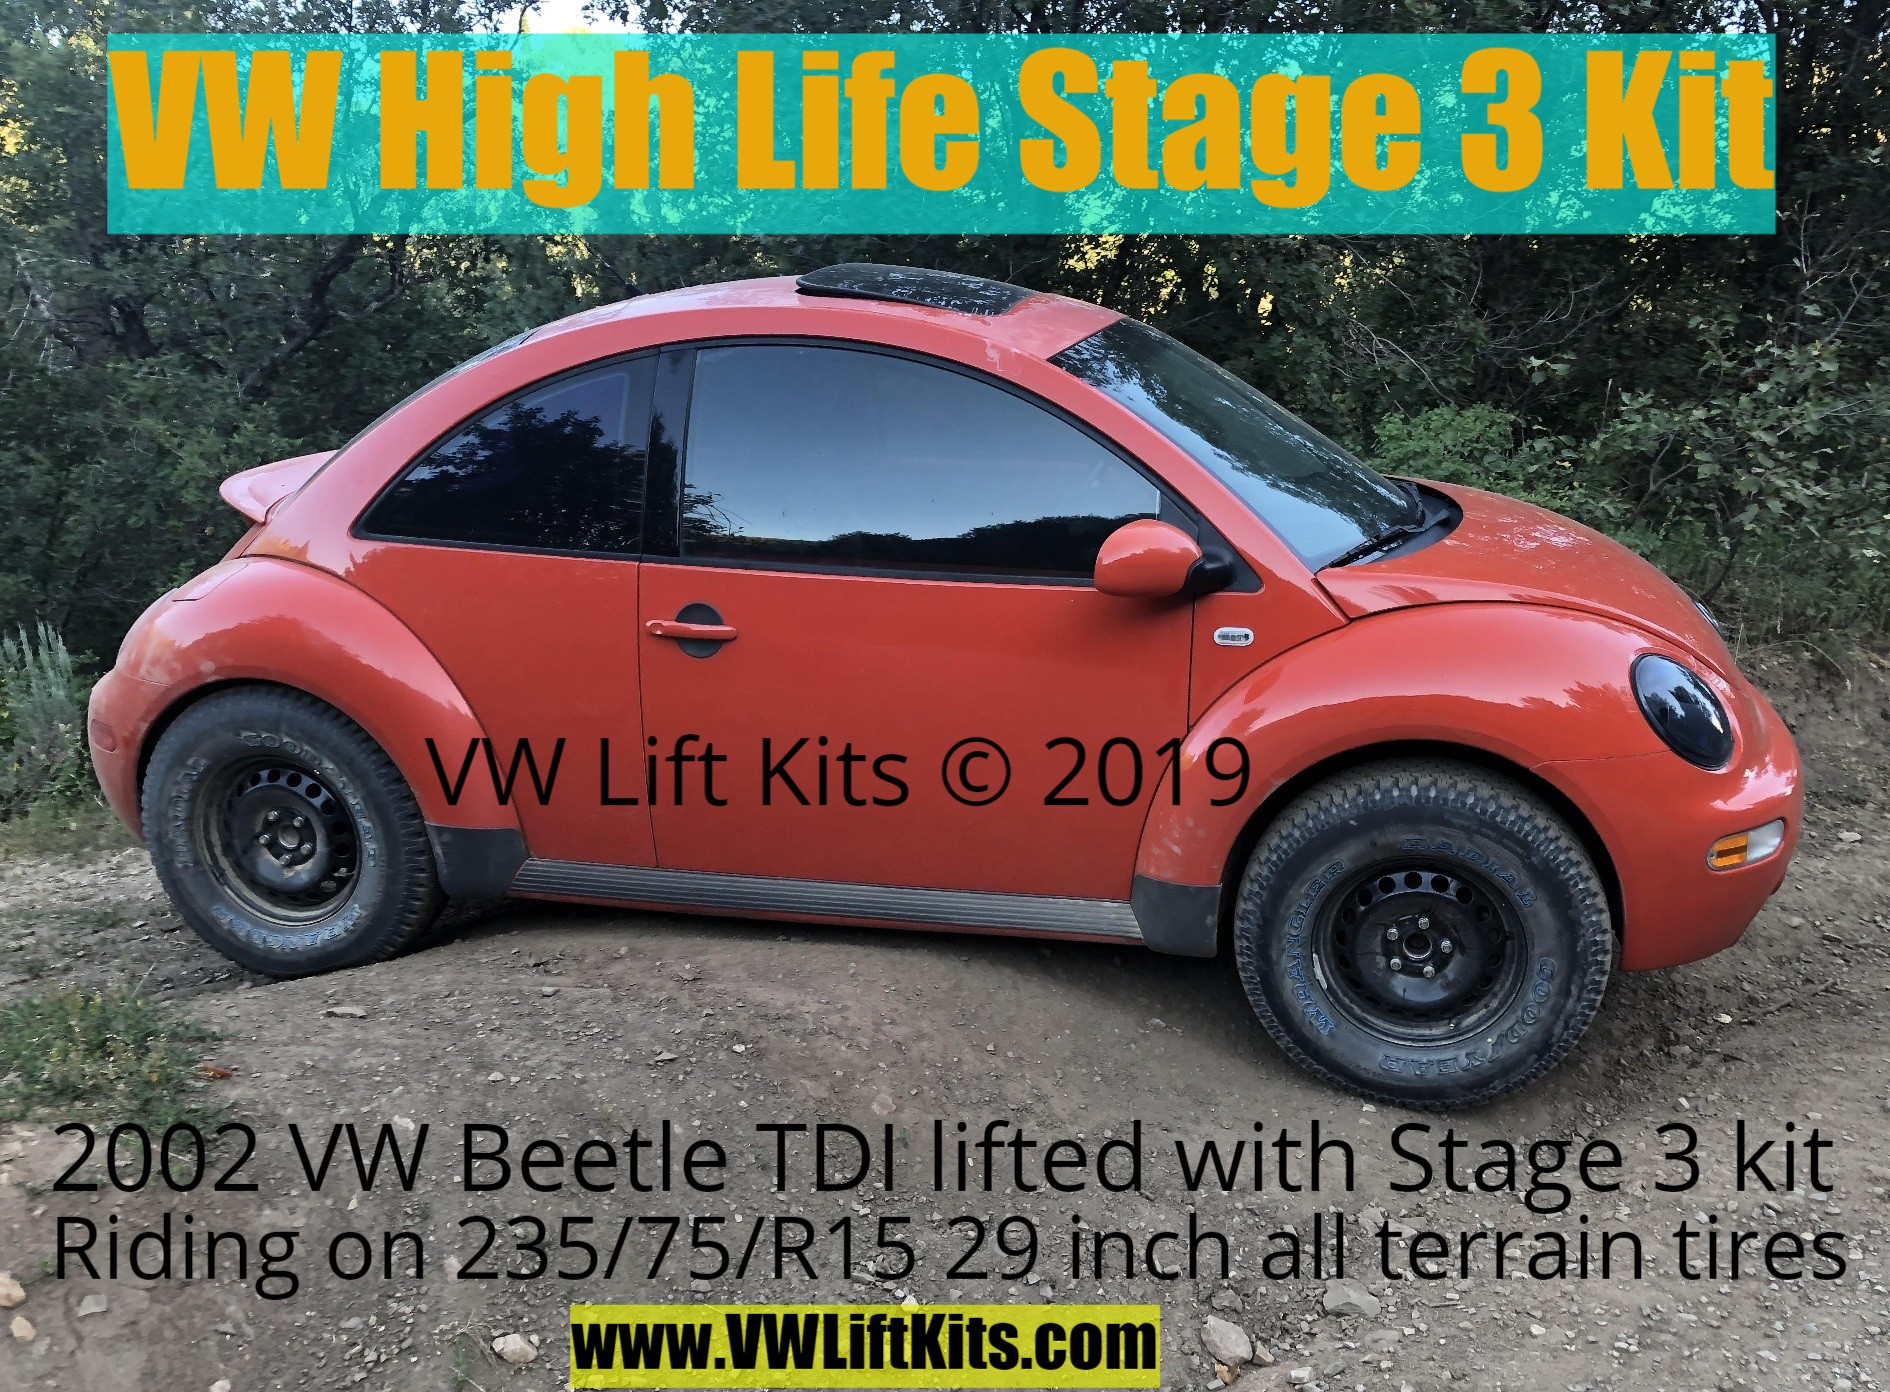 VW Beetle with Stage 3 skid plate